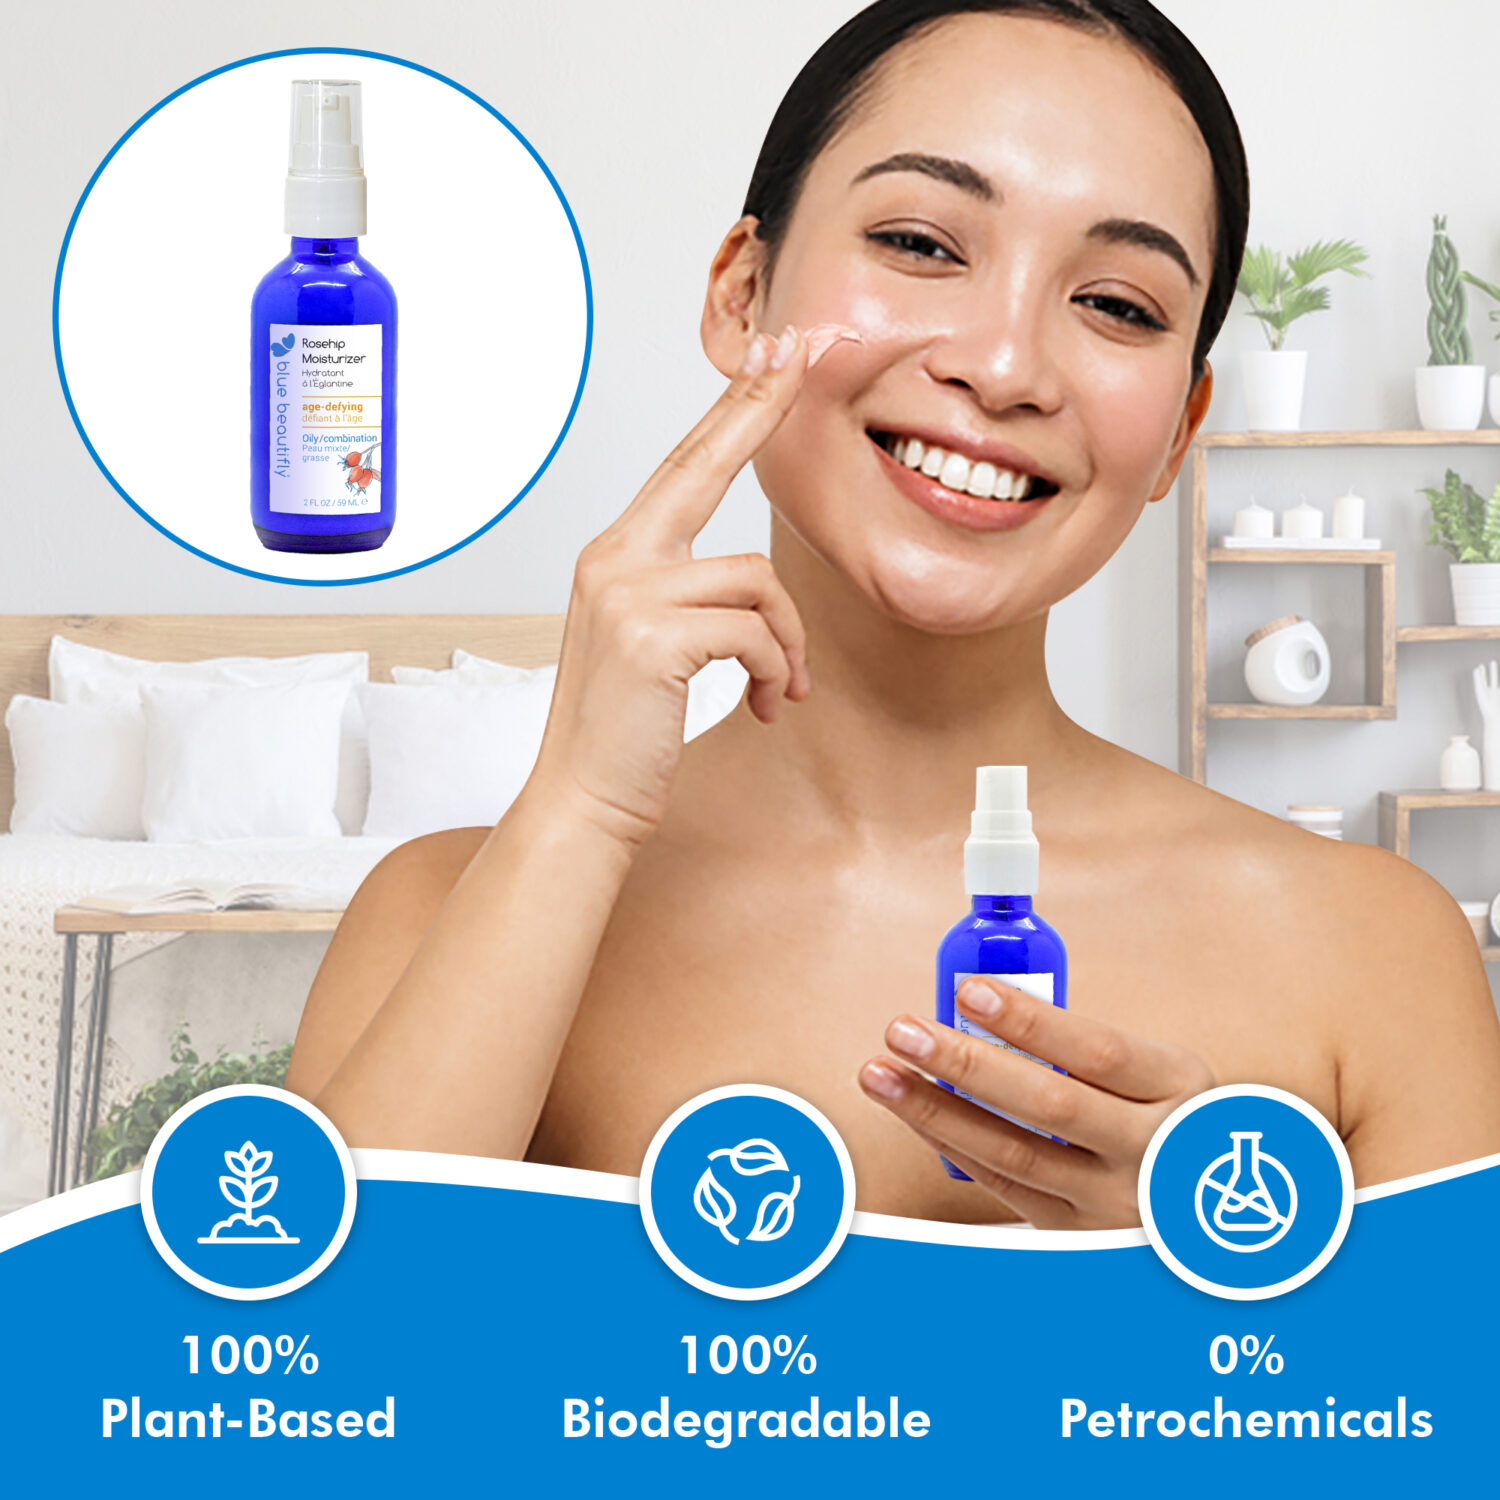 Blue Beautifly Rosehip Moisturizer is 100% plant-based and biodegradable and contains no petrochemicals or toxins